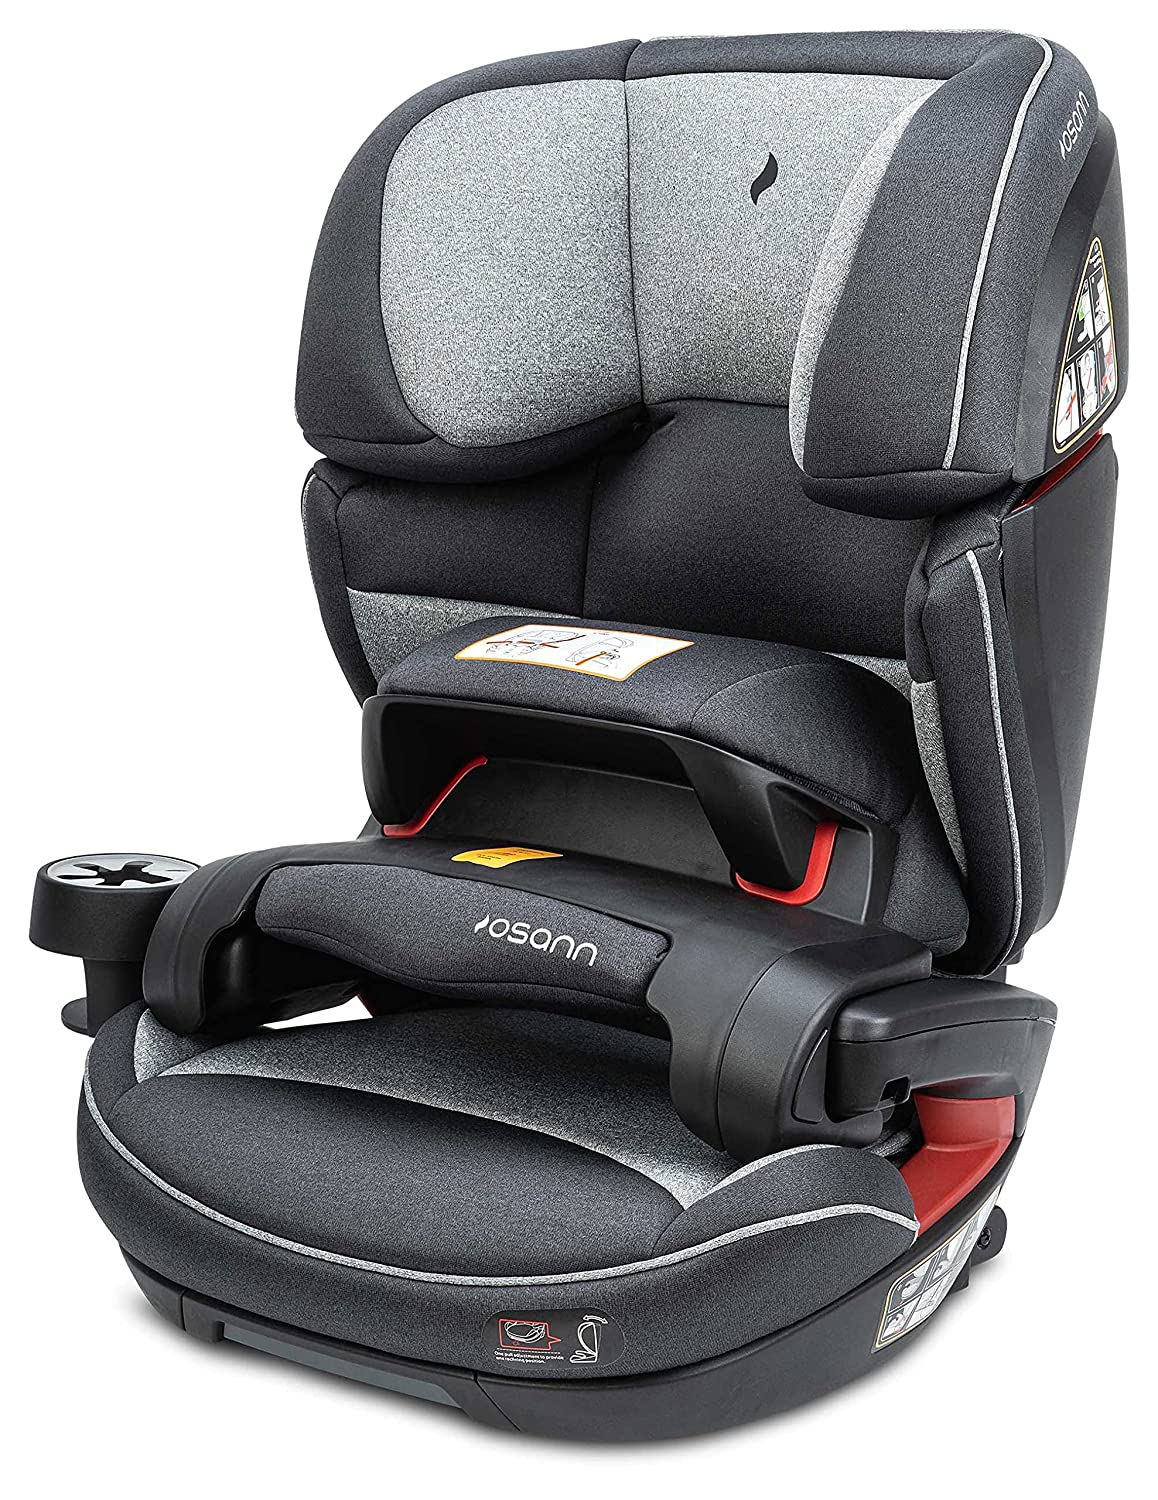 Osann Jazzi PS Children\'s Car Seat with Isofix and Impact Body System Group 1/2/3 (9-36 kg) Child Seat - Universe Grey